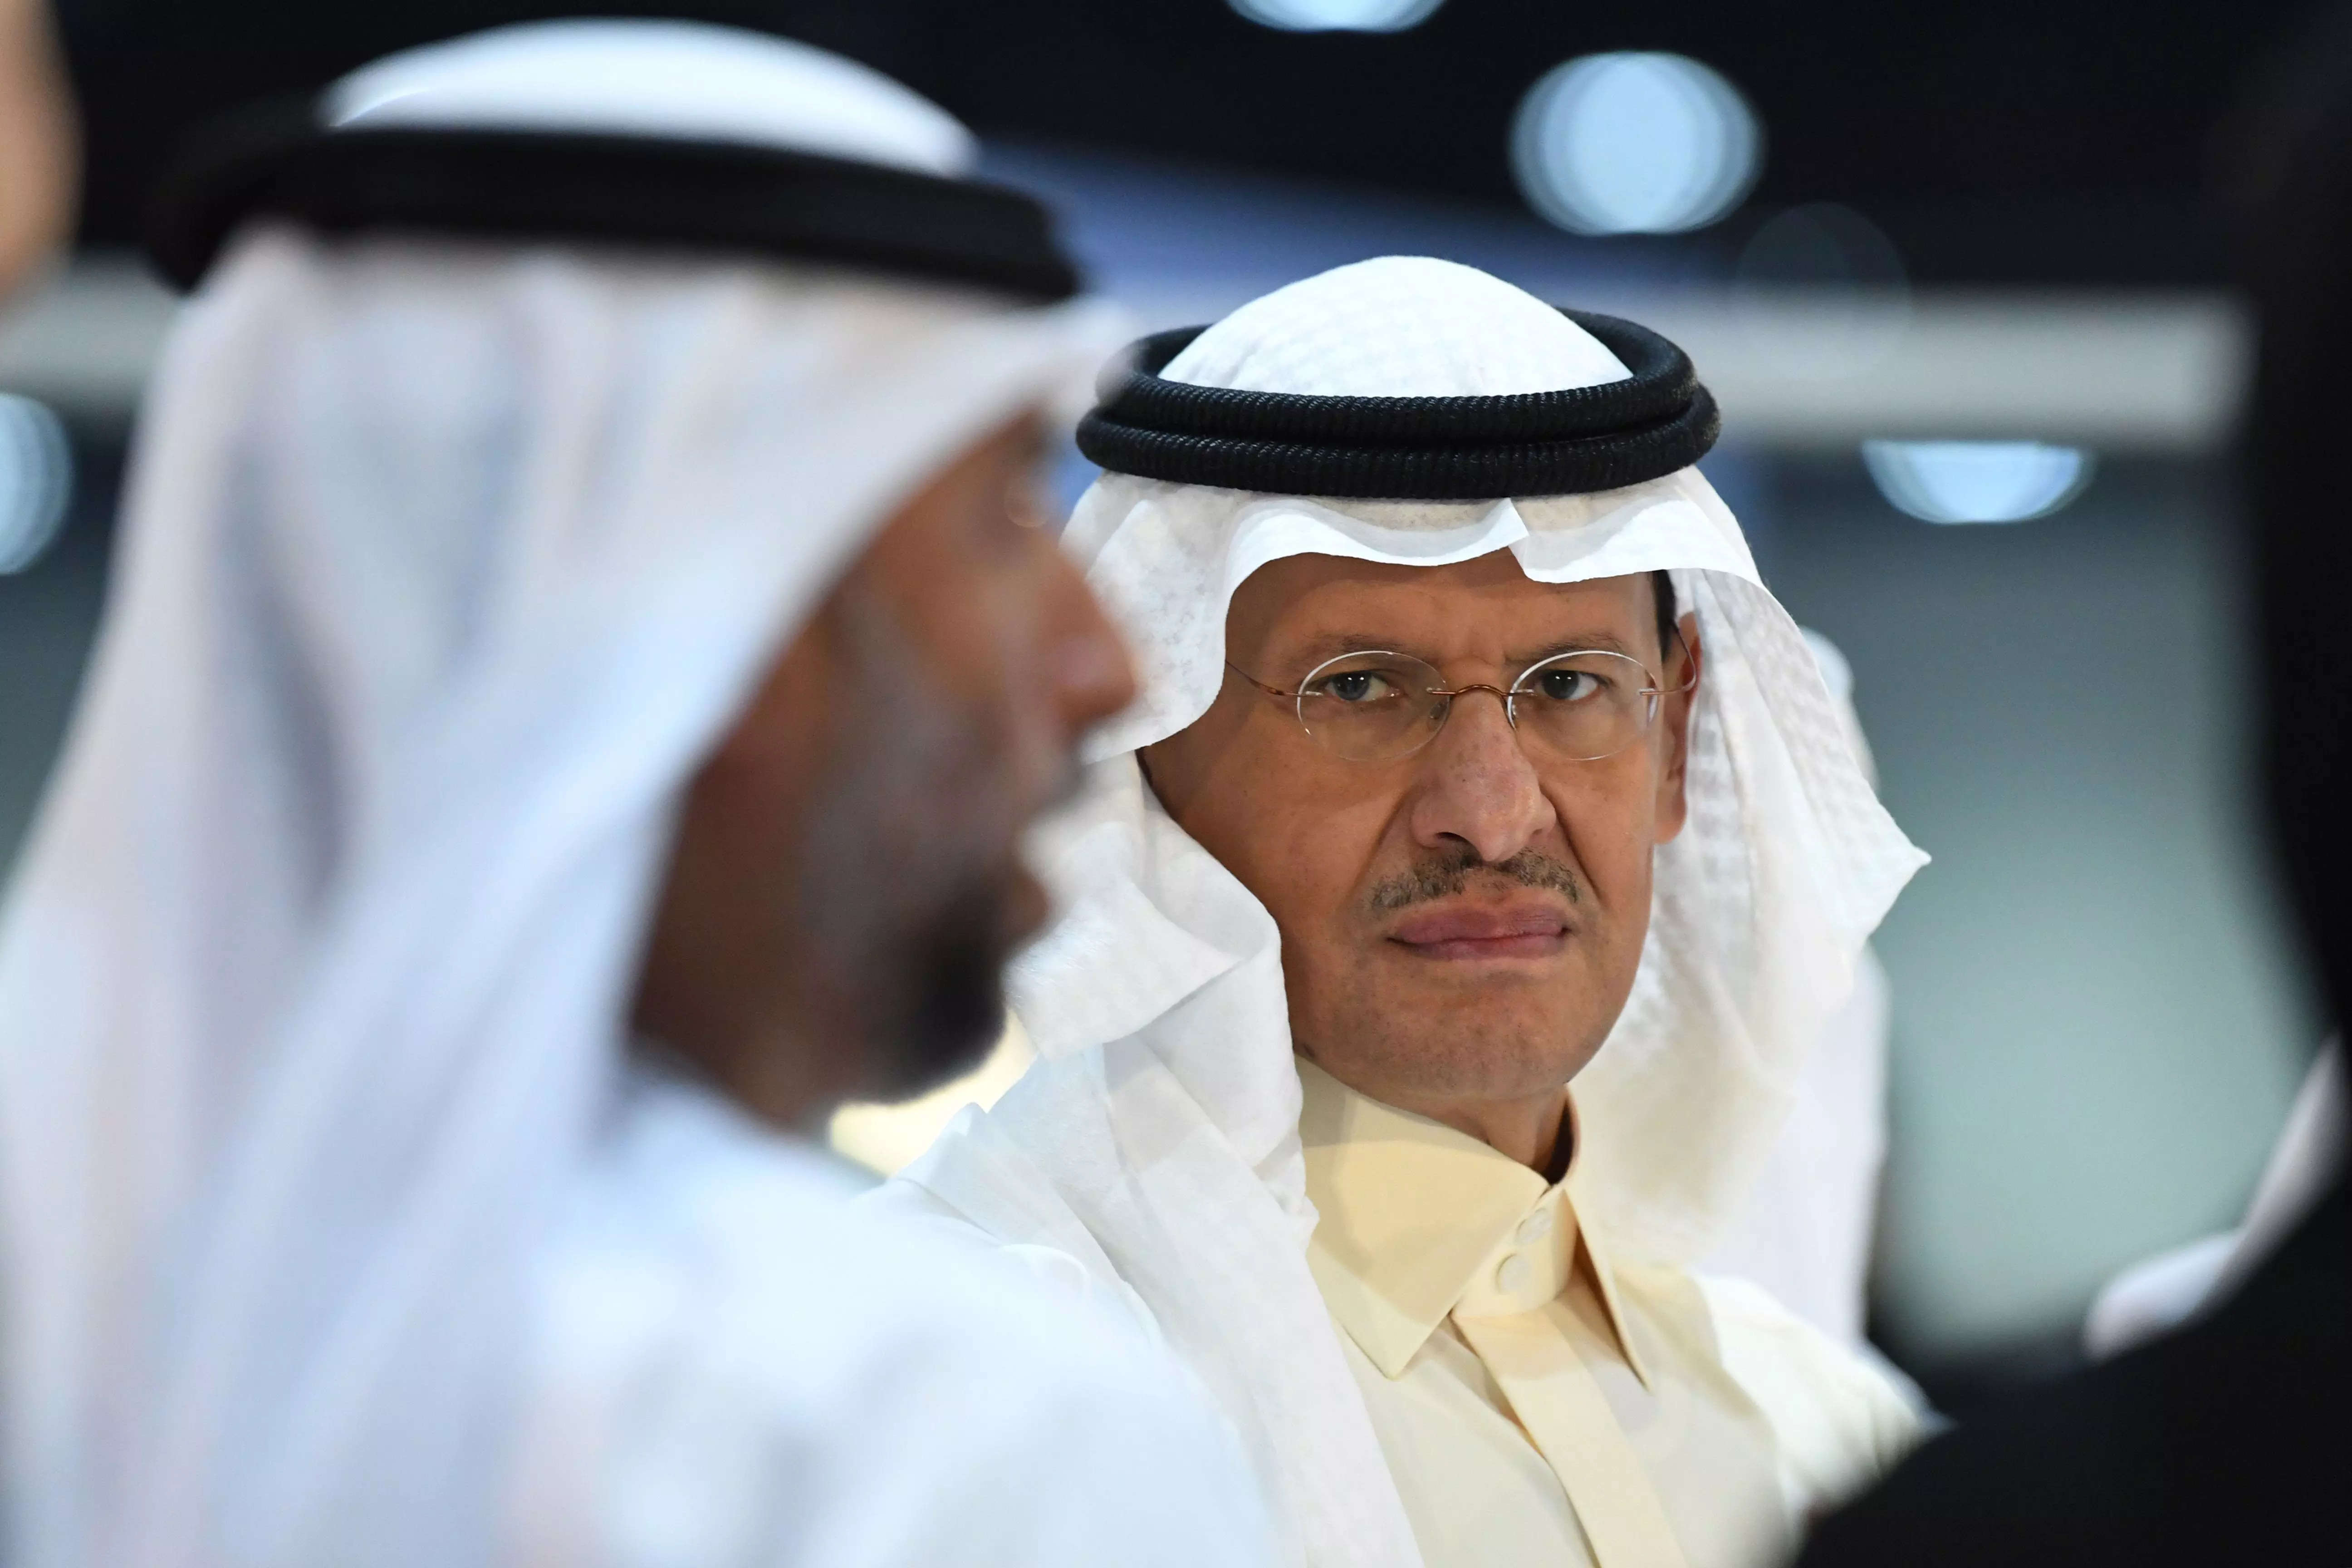 OPEC’s strength is at an all-time high and “the old oil order is back,” says the head of commodities bank Goldman Sachs